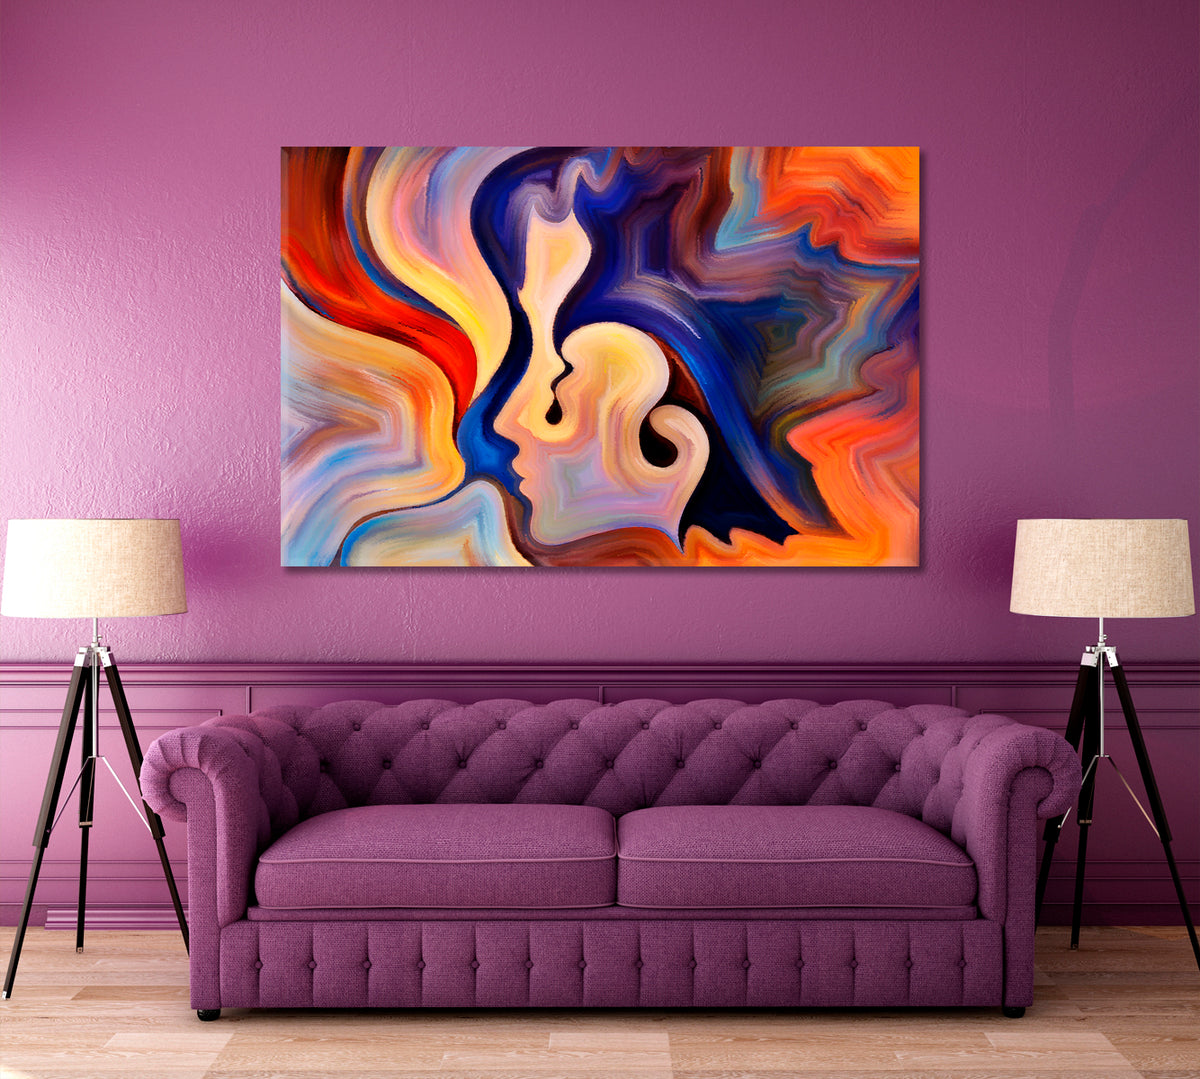 Human and Nature Abstract Colorful Design Contemporary Art Artesty 1 panel 24" x 16" 